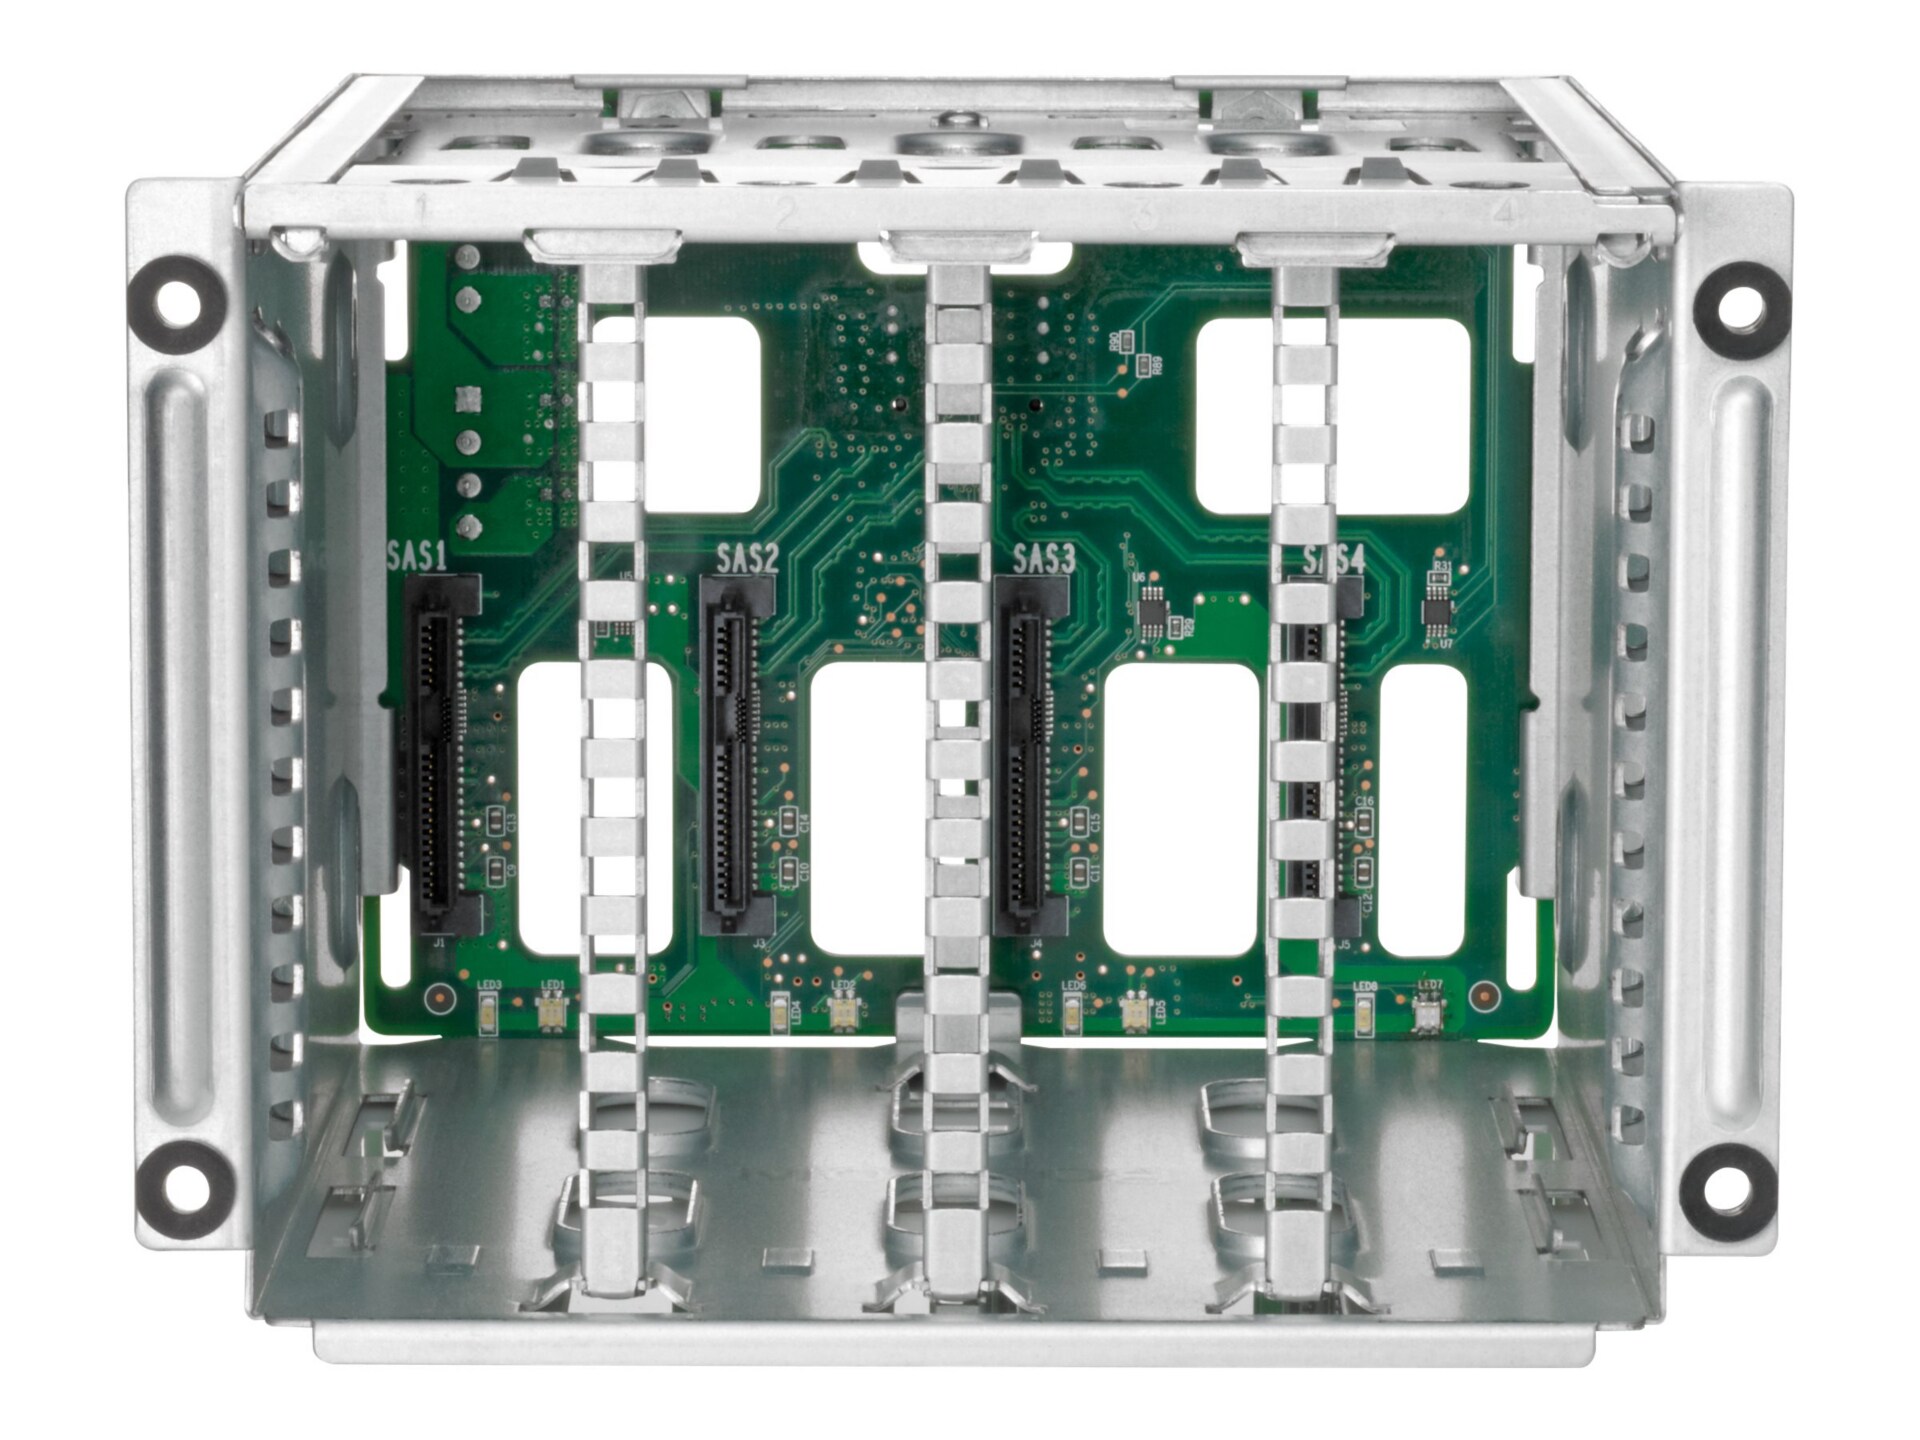 HPE 2SFF and 2FHHL Kit - storage drive cage